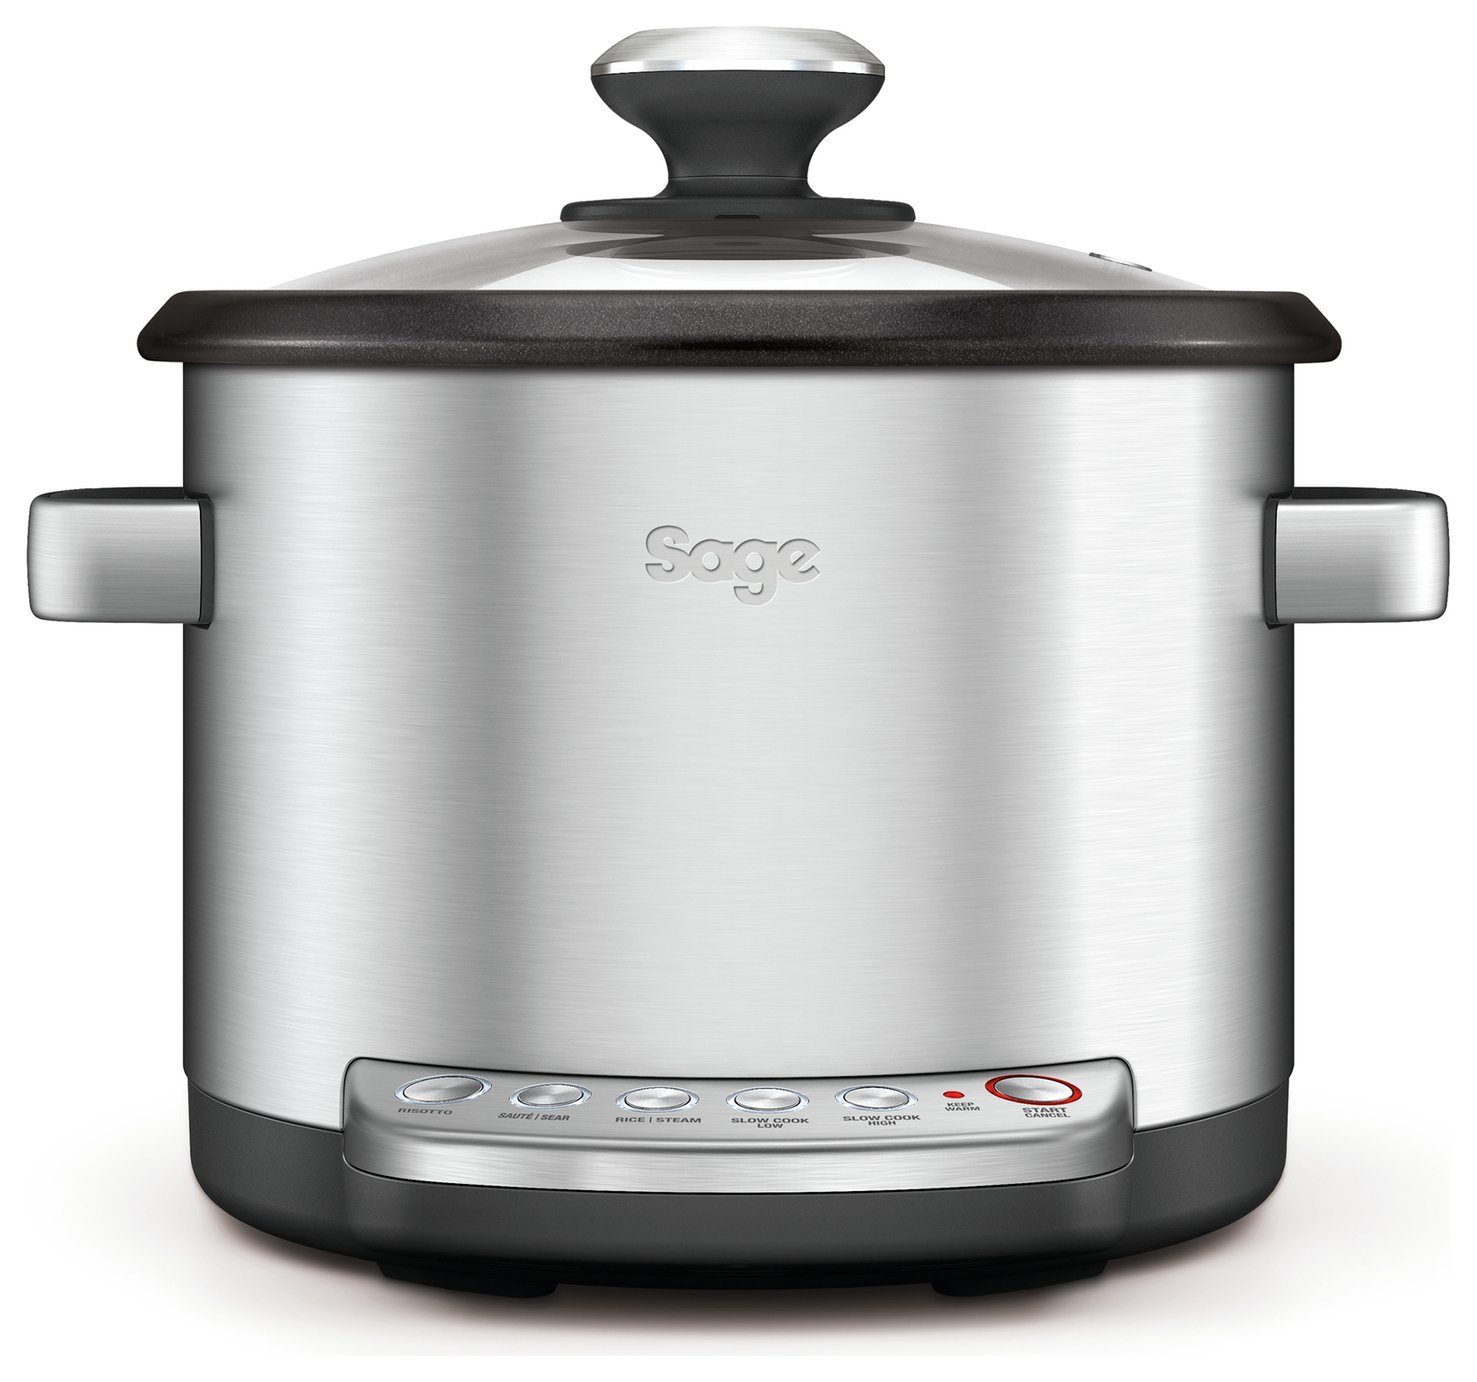 Sage The Risotto Plus 7-in-1 3.5L Multi Cooker review